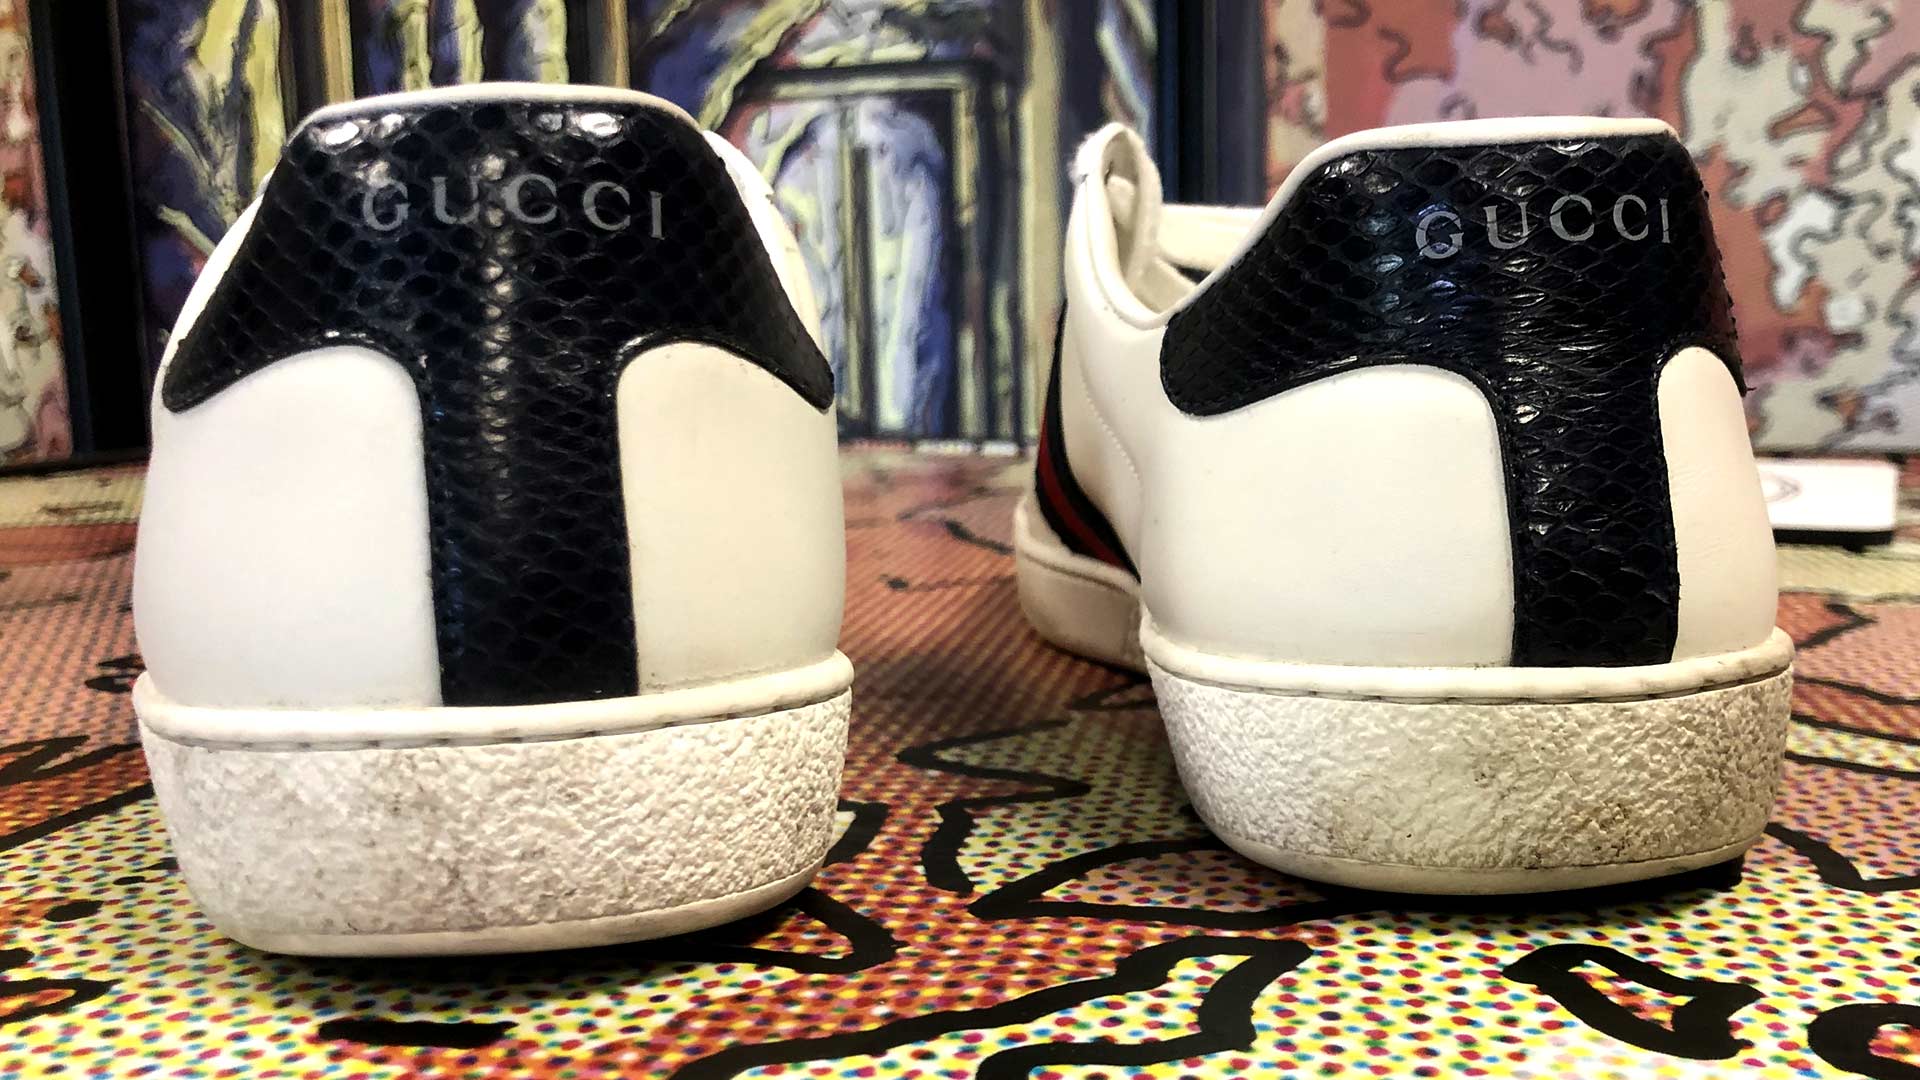 Gucci Ace Sneaker Cleaning Before Heels